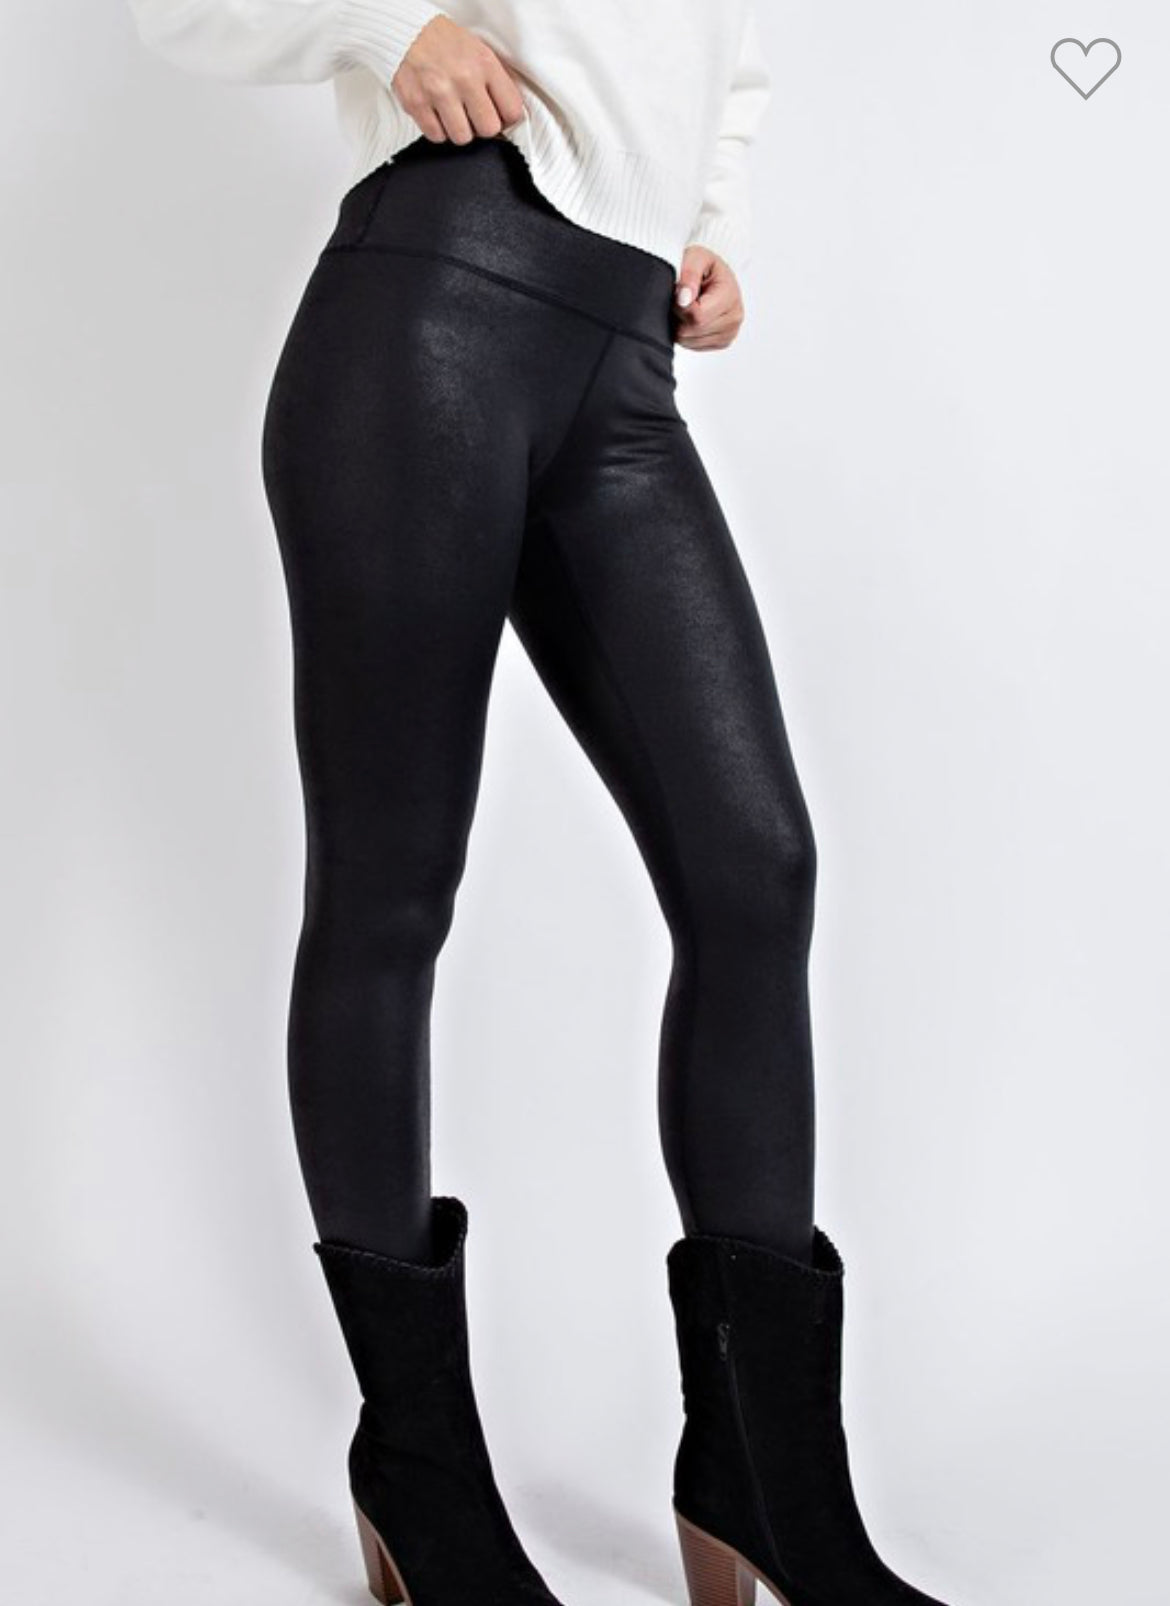 CLIV Womens Faux Leather Leggings Stretch High Waisted Leather